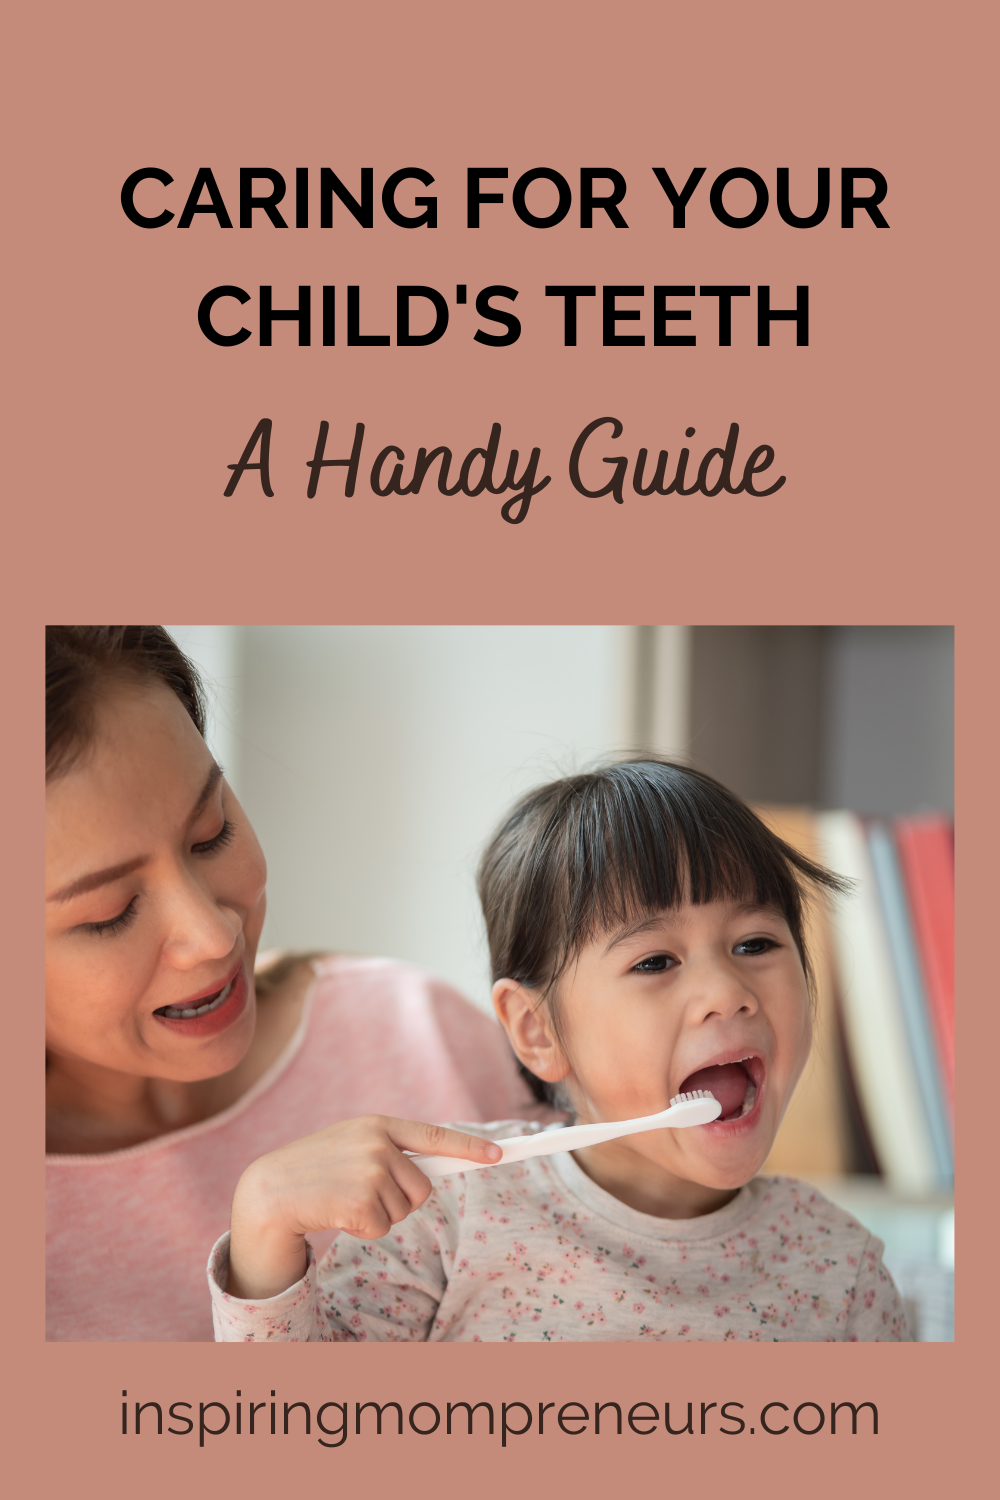 Caring for your child's teeth